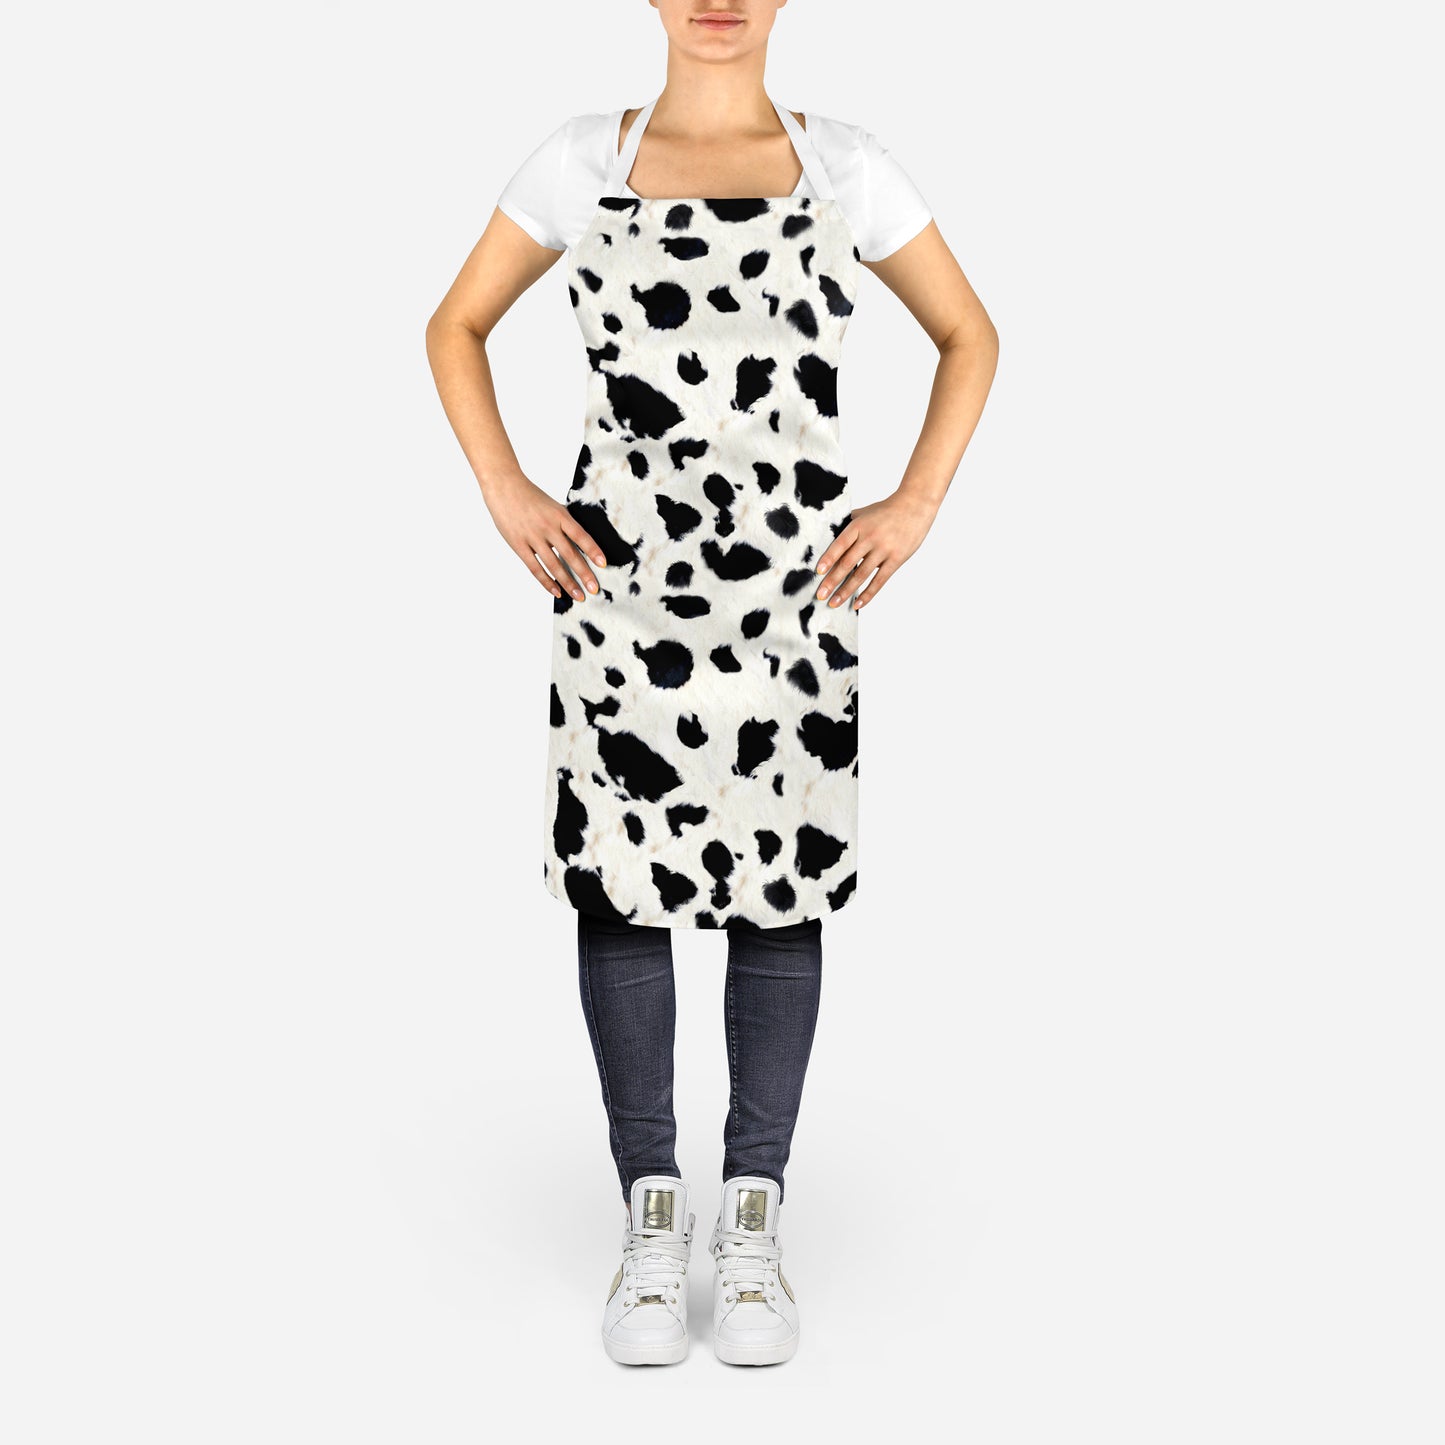 Realistic Cow Texture - Adult Apron